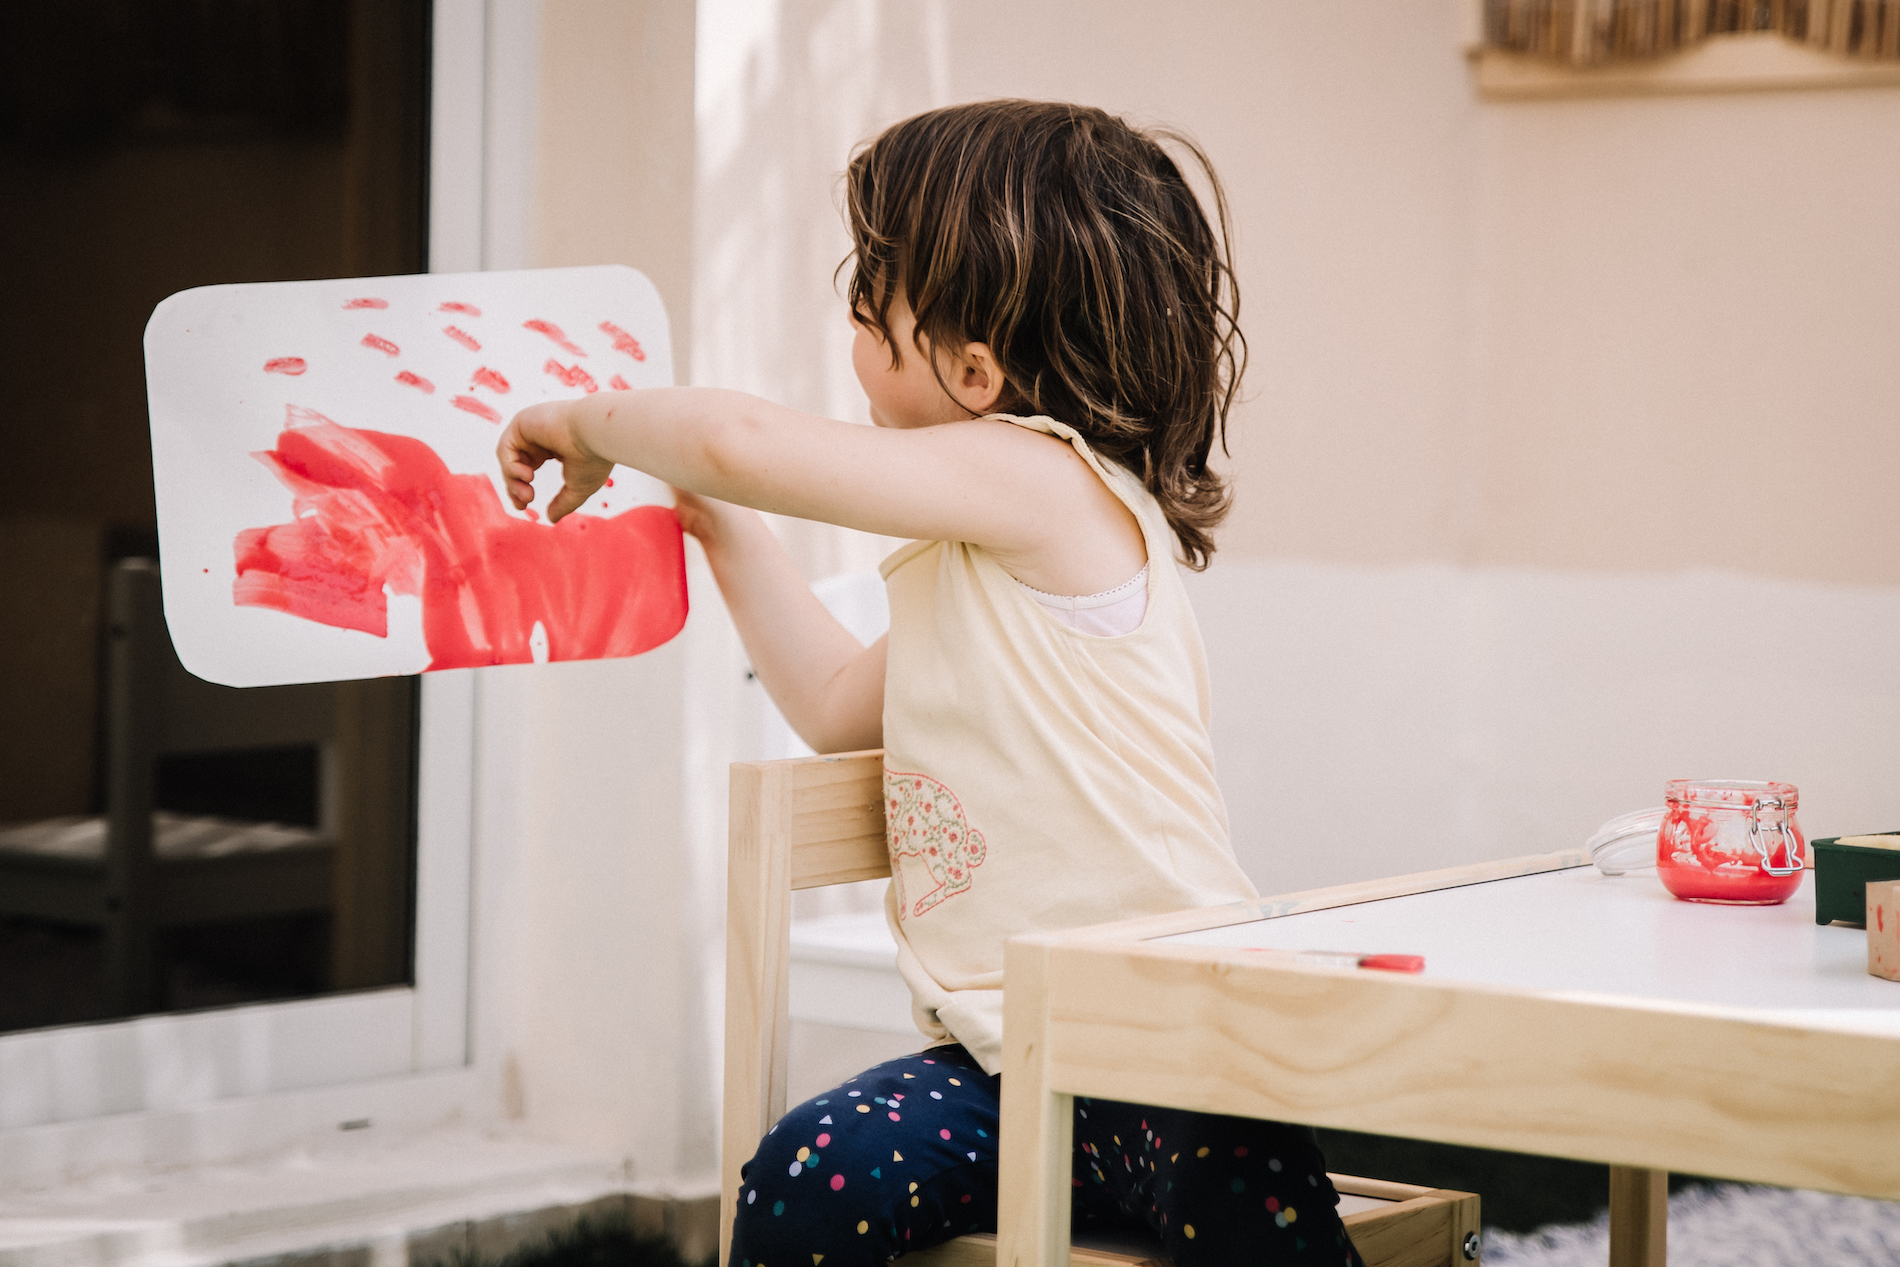 Three year old showing picture she has painted